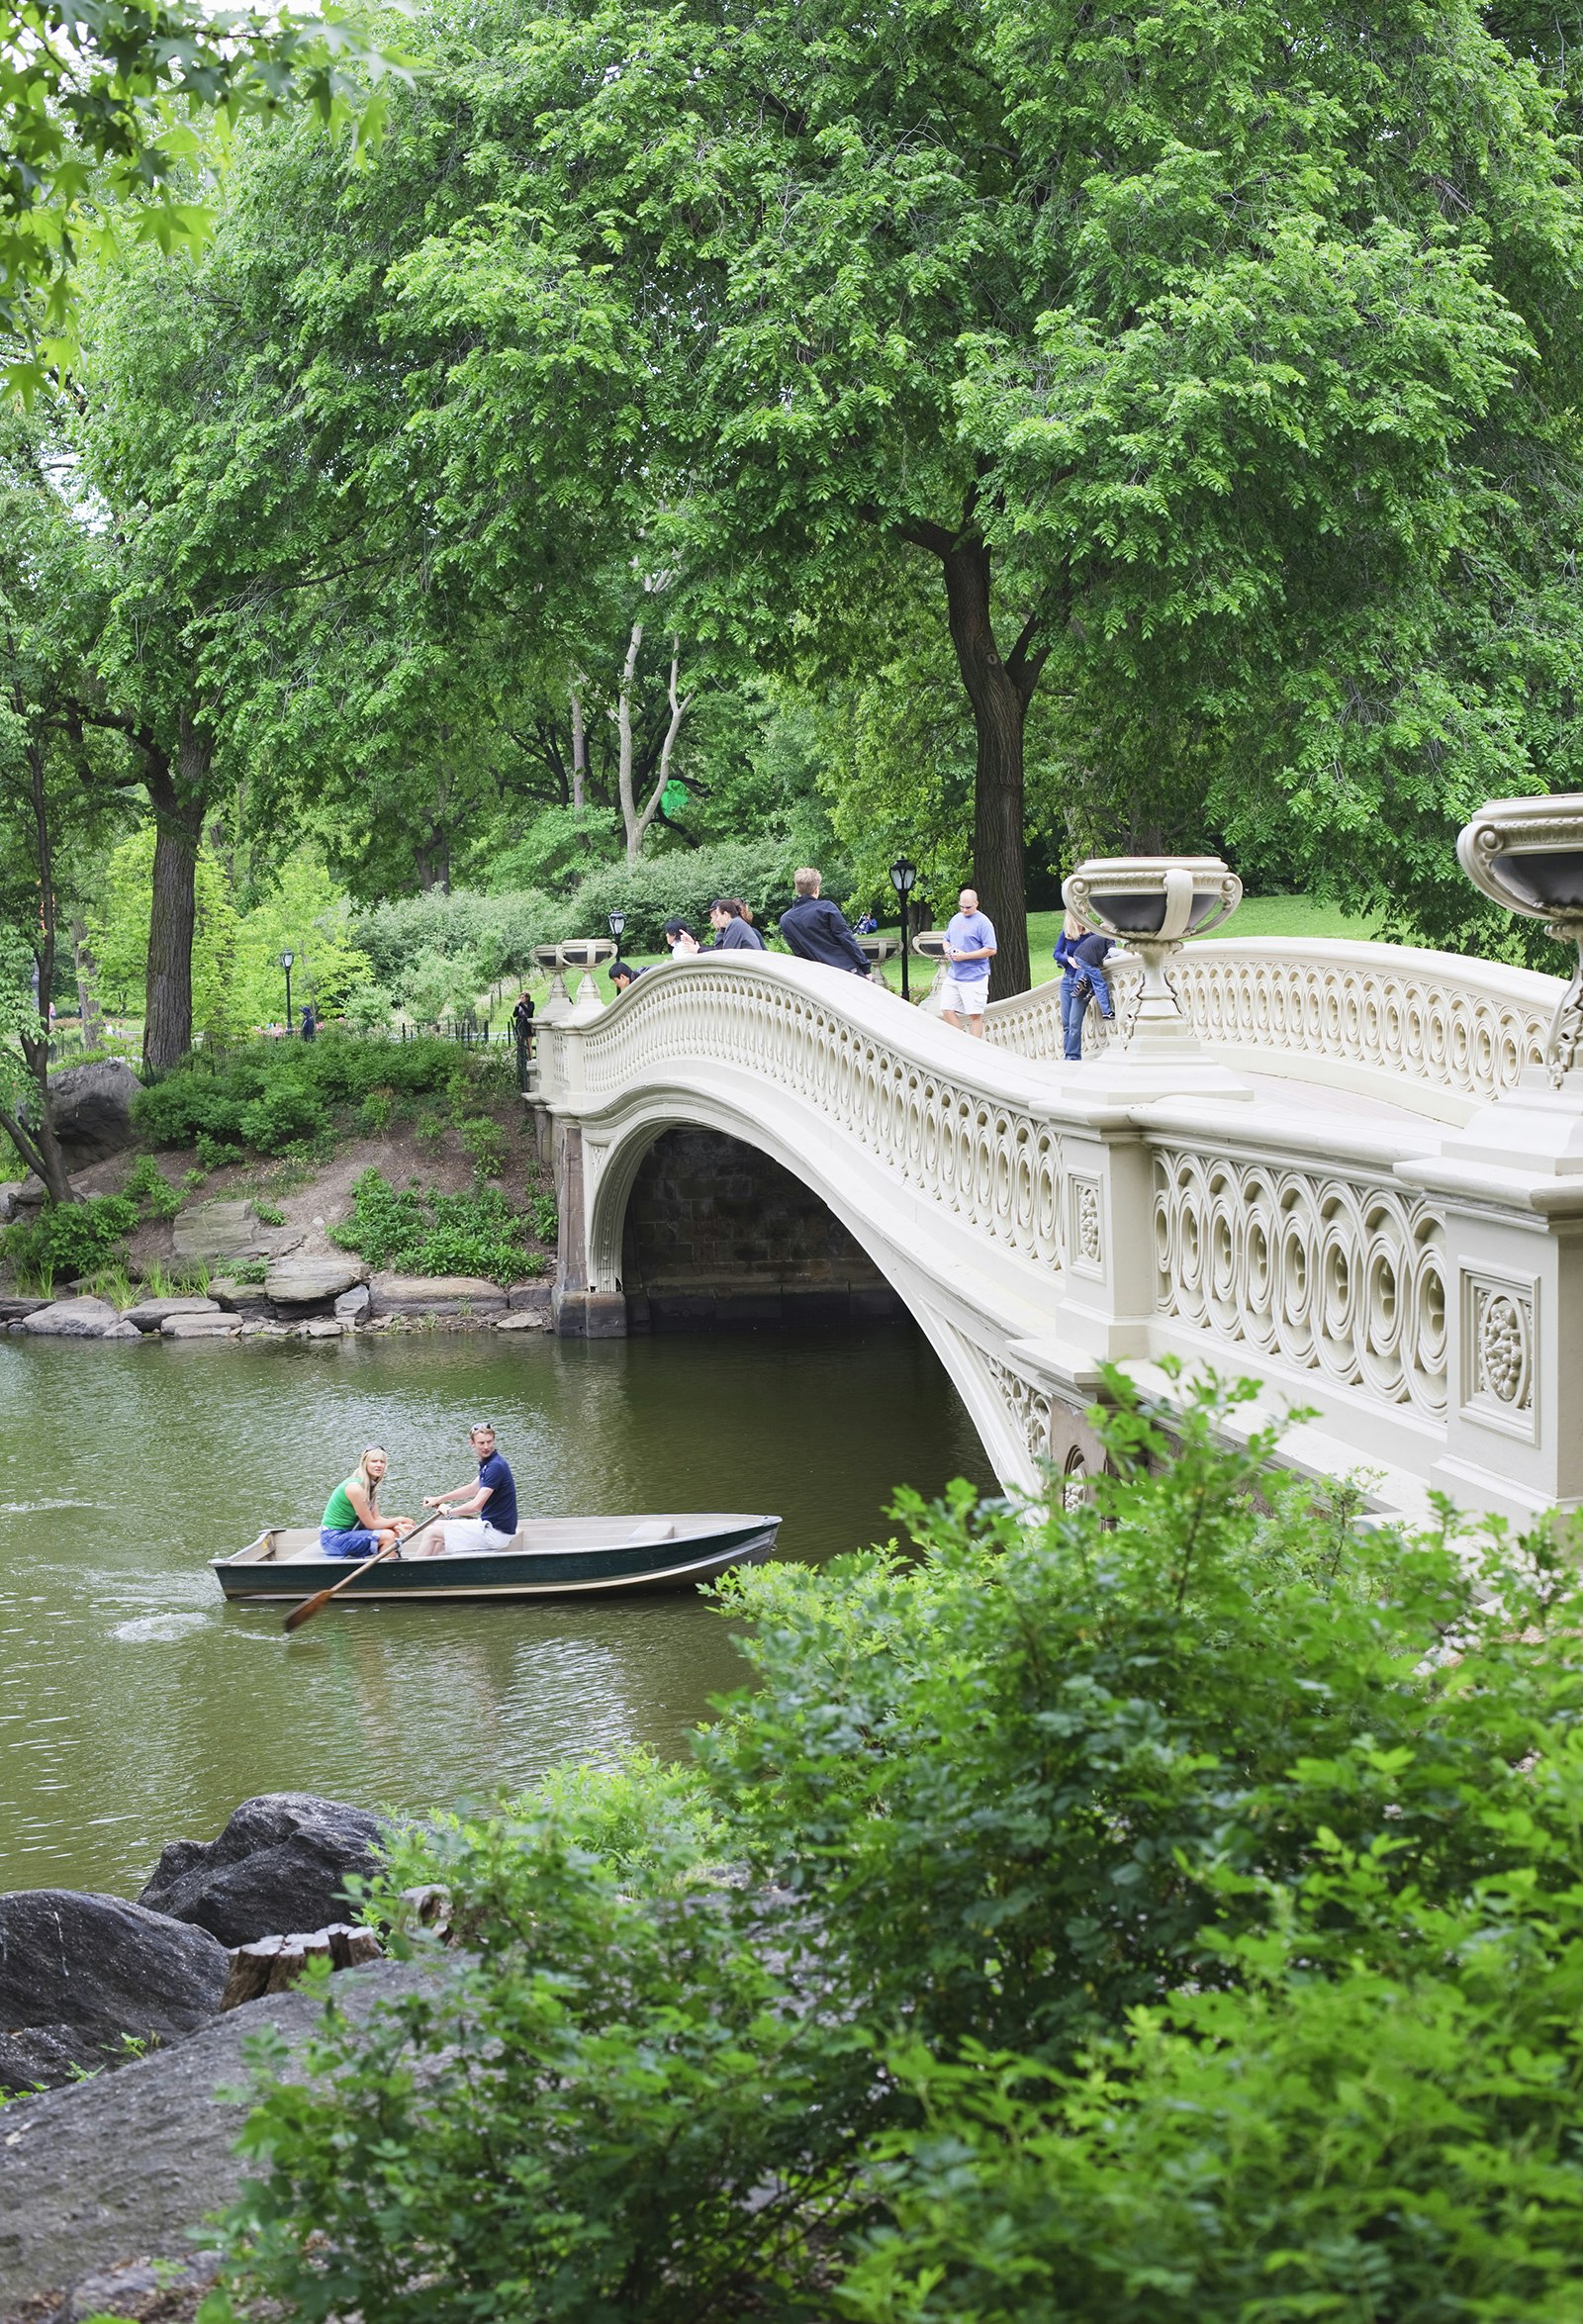 Two people row a small boat beneath Bow Bridge in Central Park in summer, as others cross the bridge on foot © Amanda Hall / robertharding / Getty Images